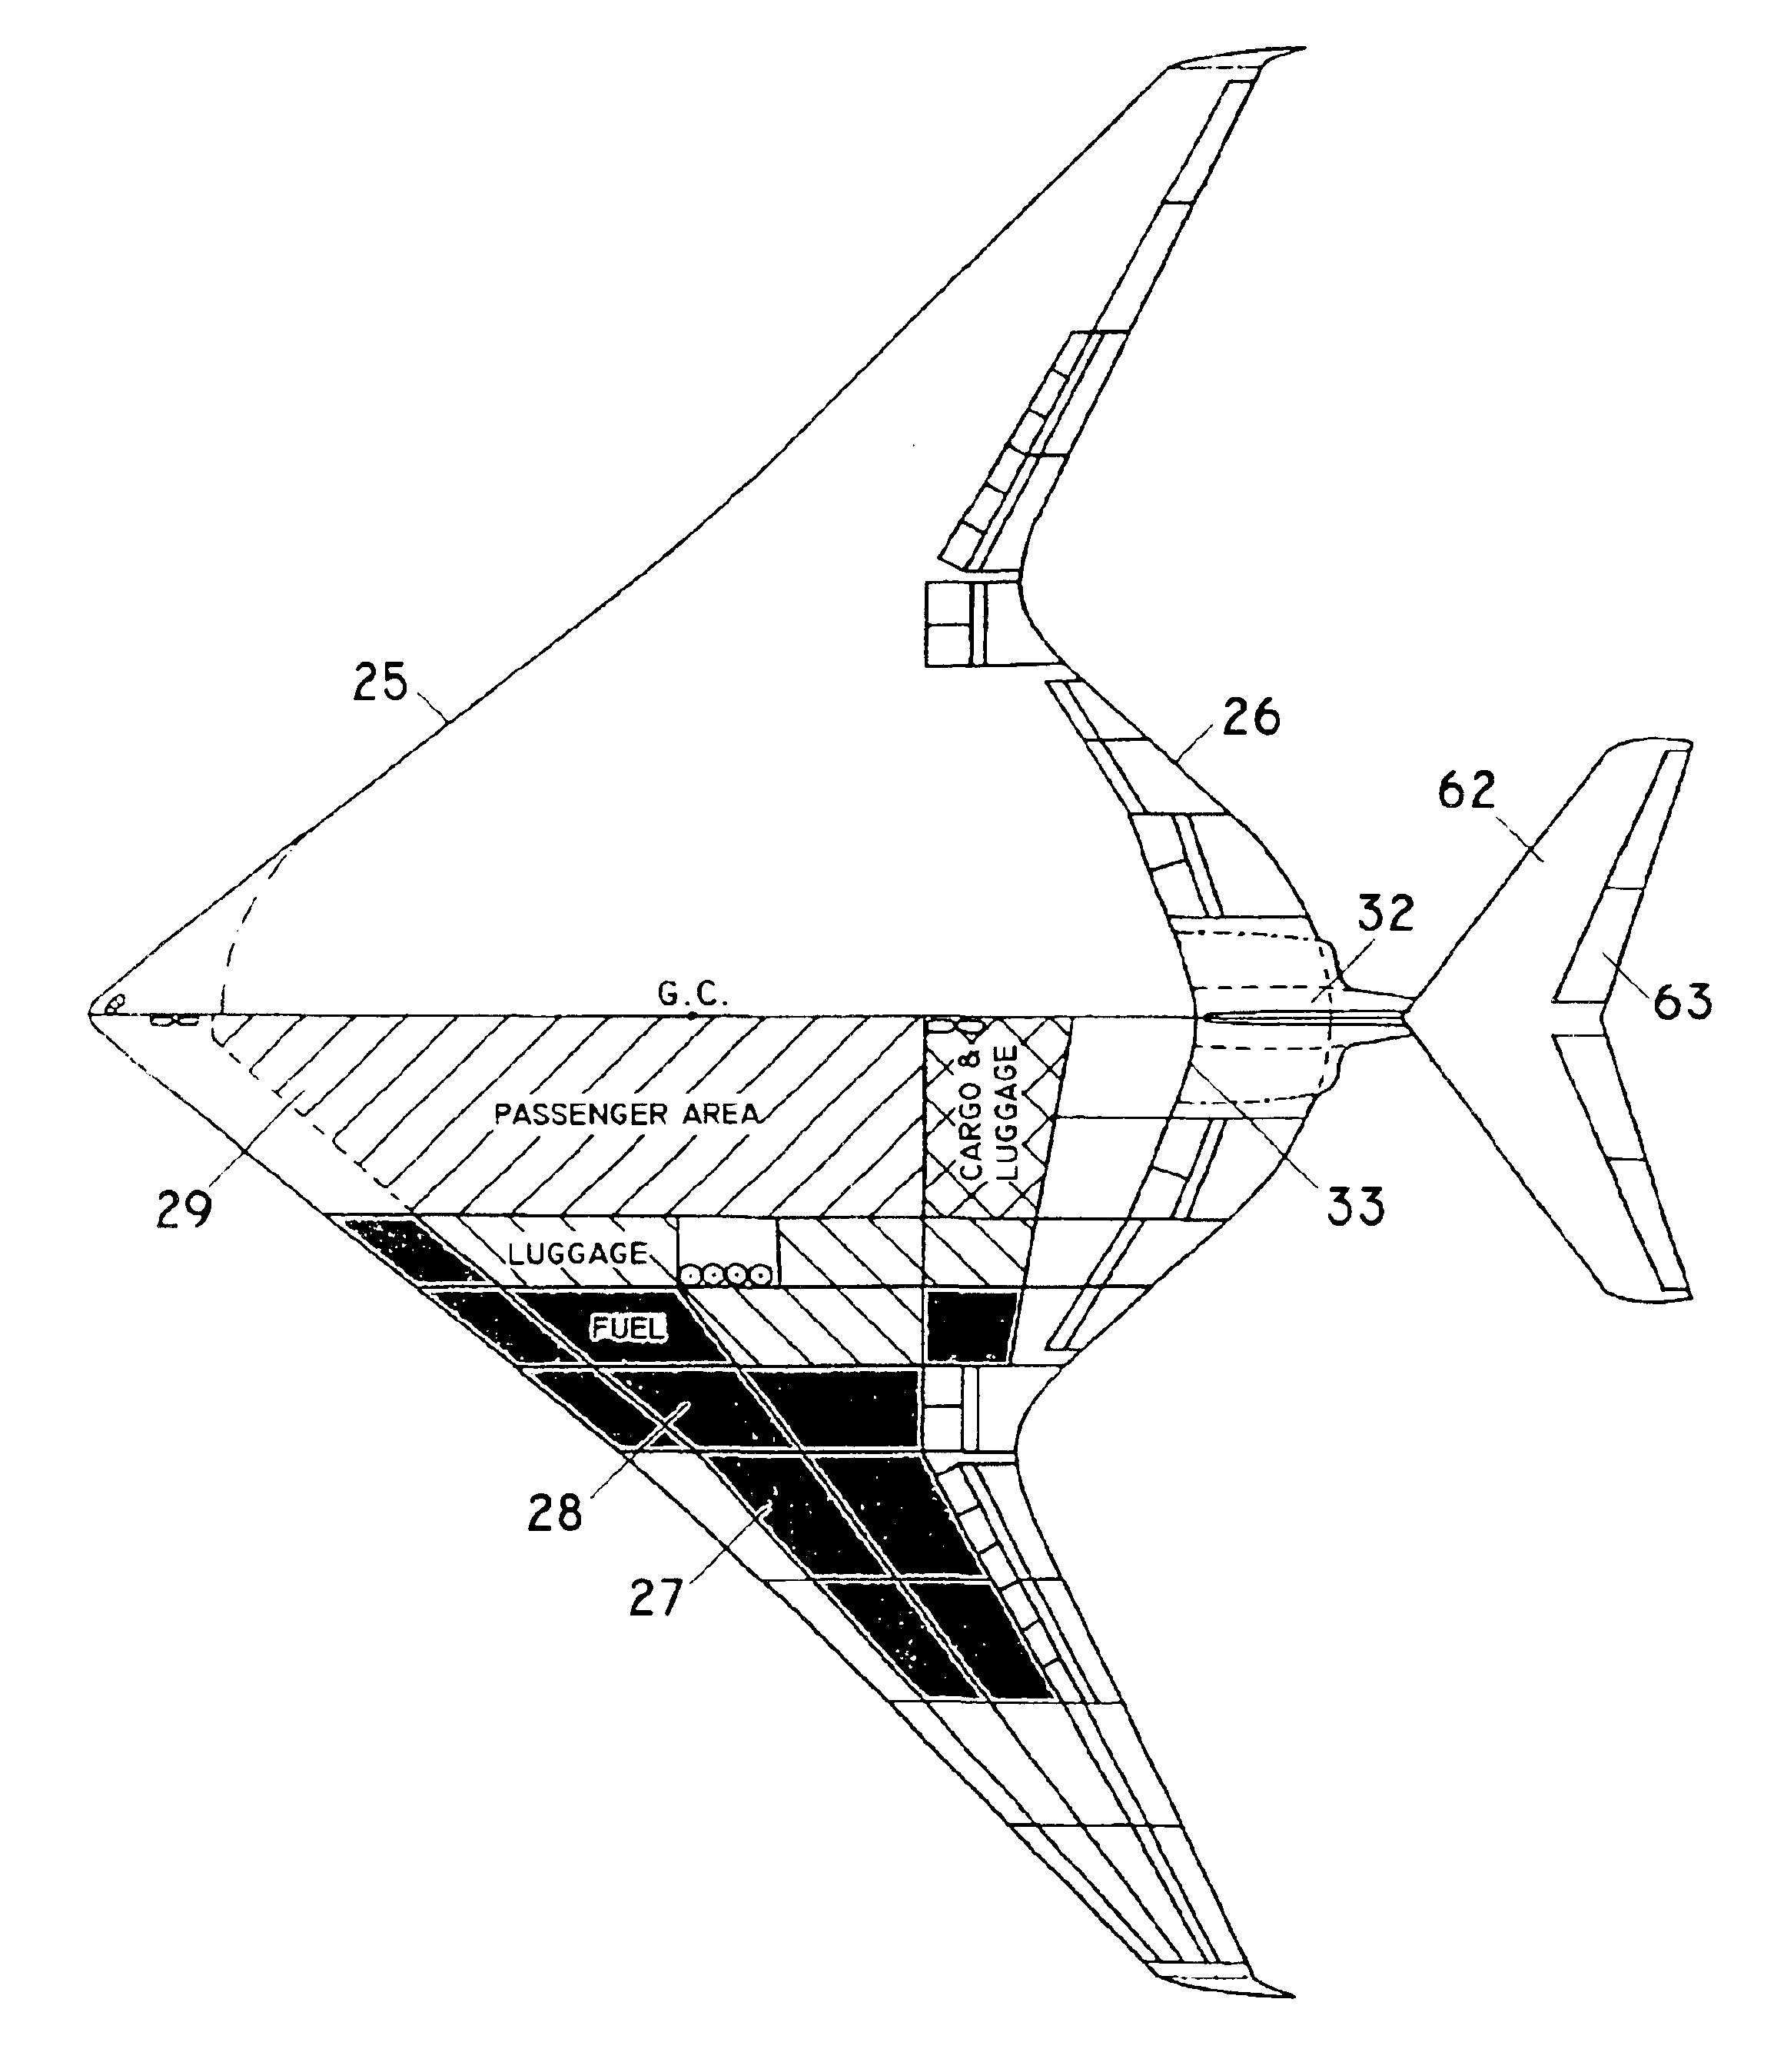 Tailed flying wing aircraft